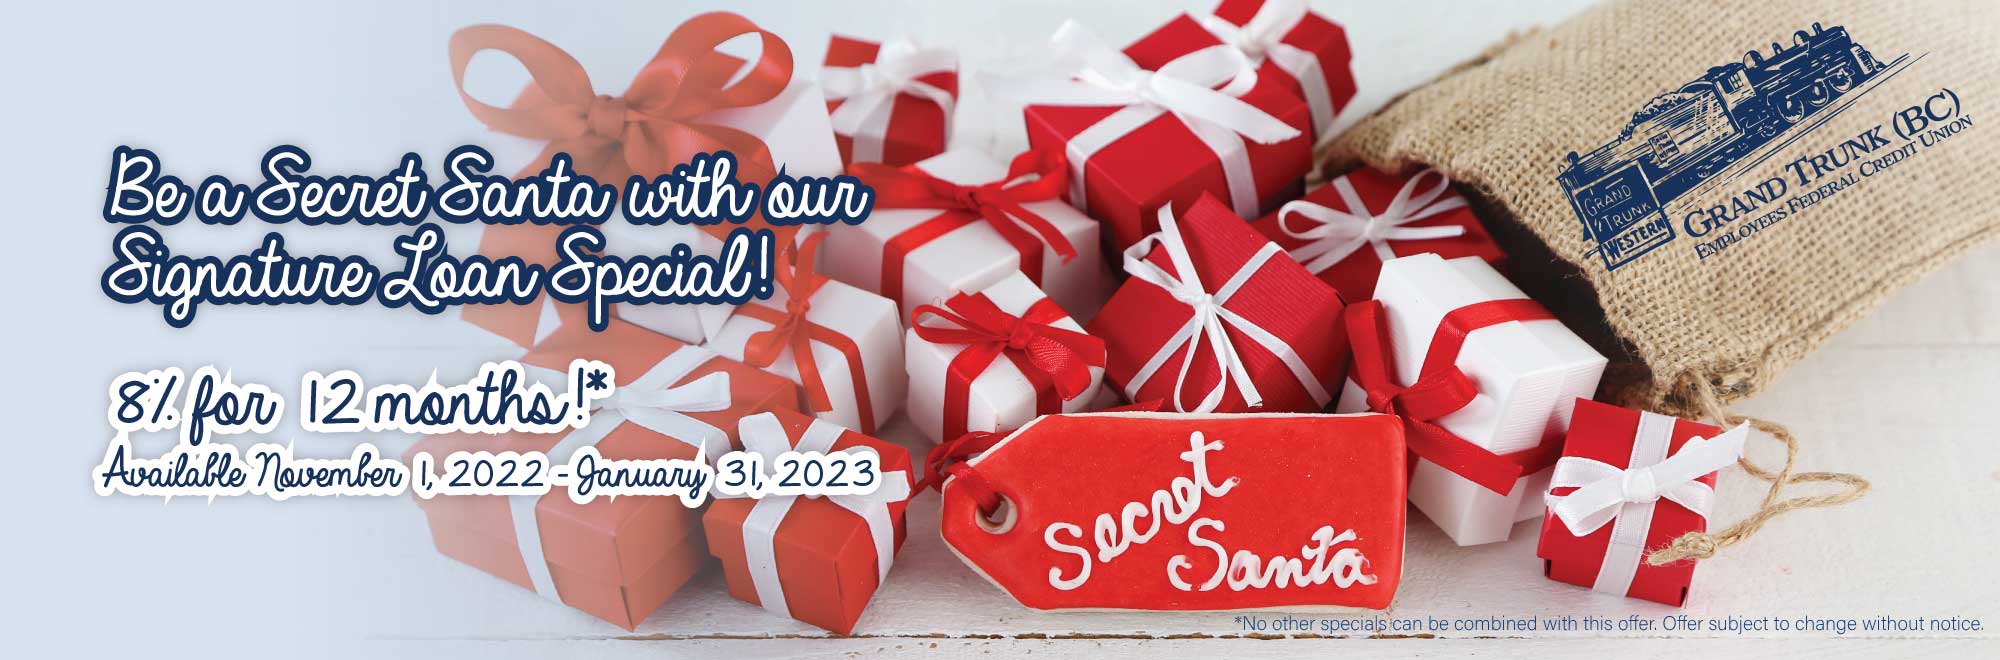 Be a Secret Santa with out Signature Loan Special. 8% for 12 months!* Available 11/1/22 - 1/31/23. * No other specials can be combined with this offer. Offer subject to change without notice.